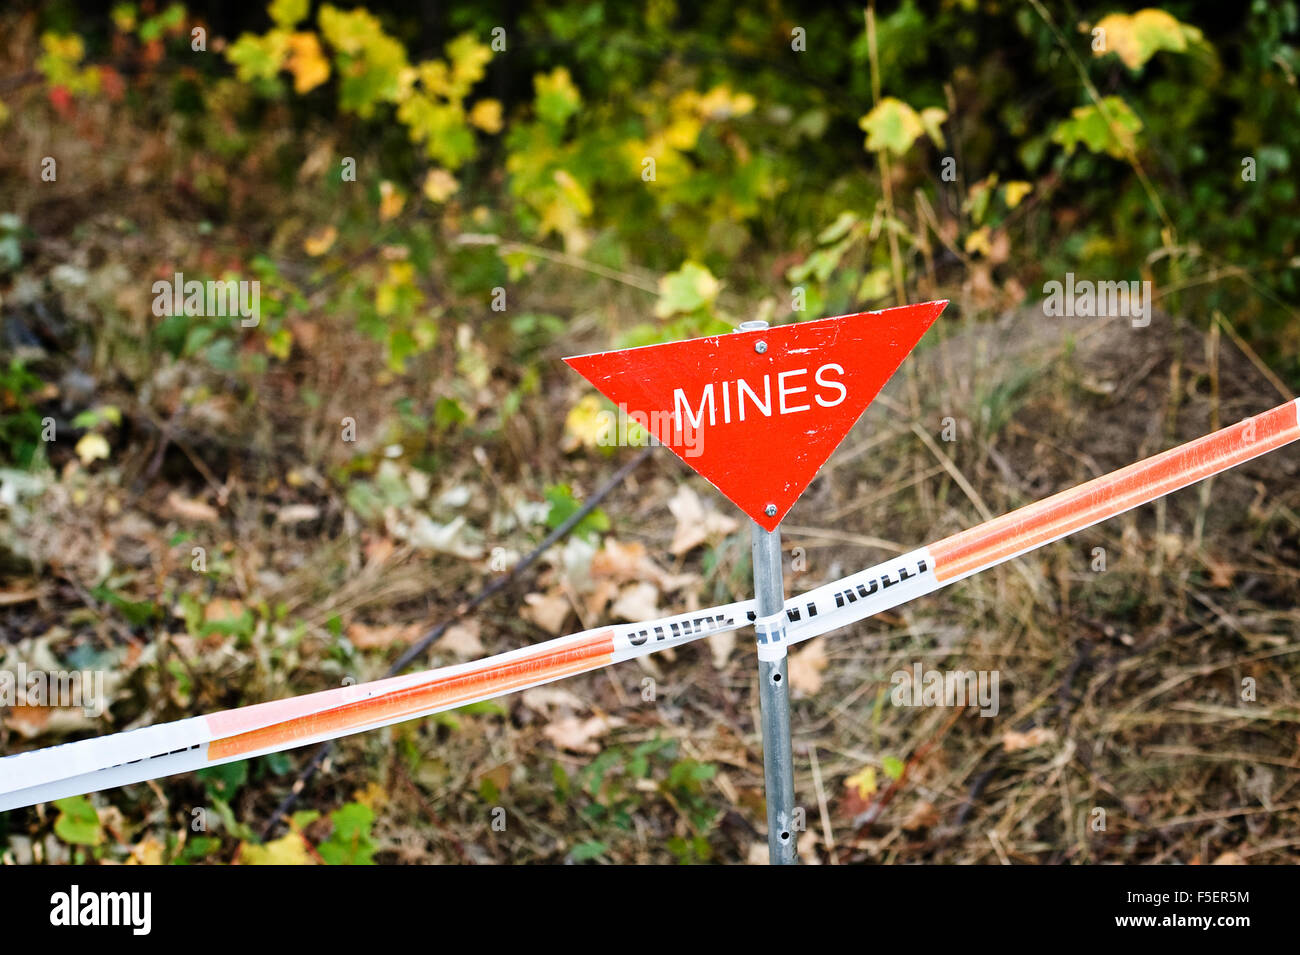 Triangular, red 'mines' sign on taped off mine field Stock Photo